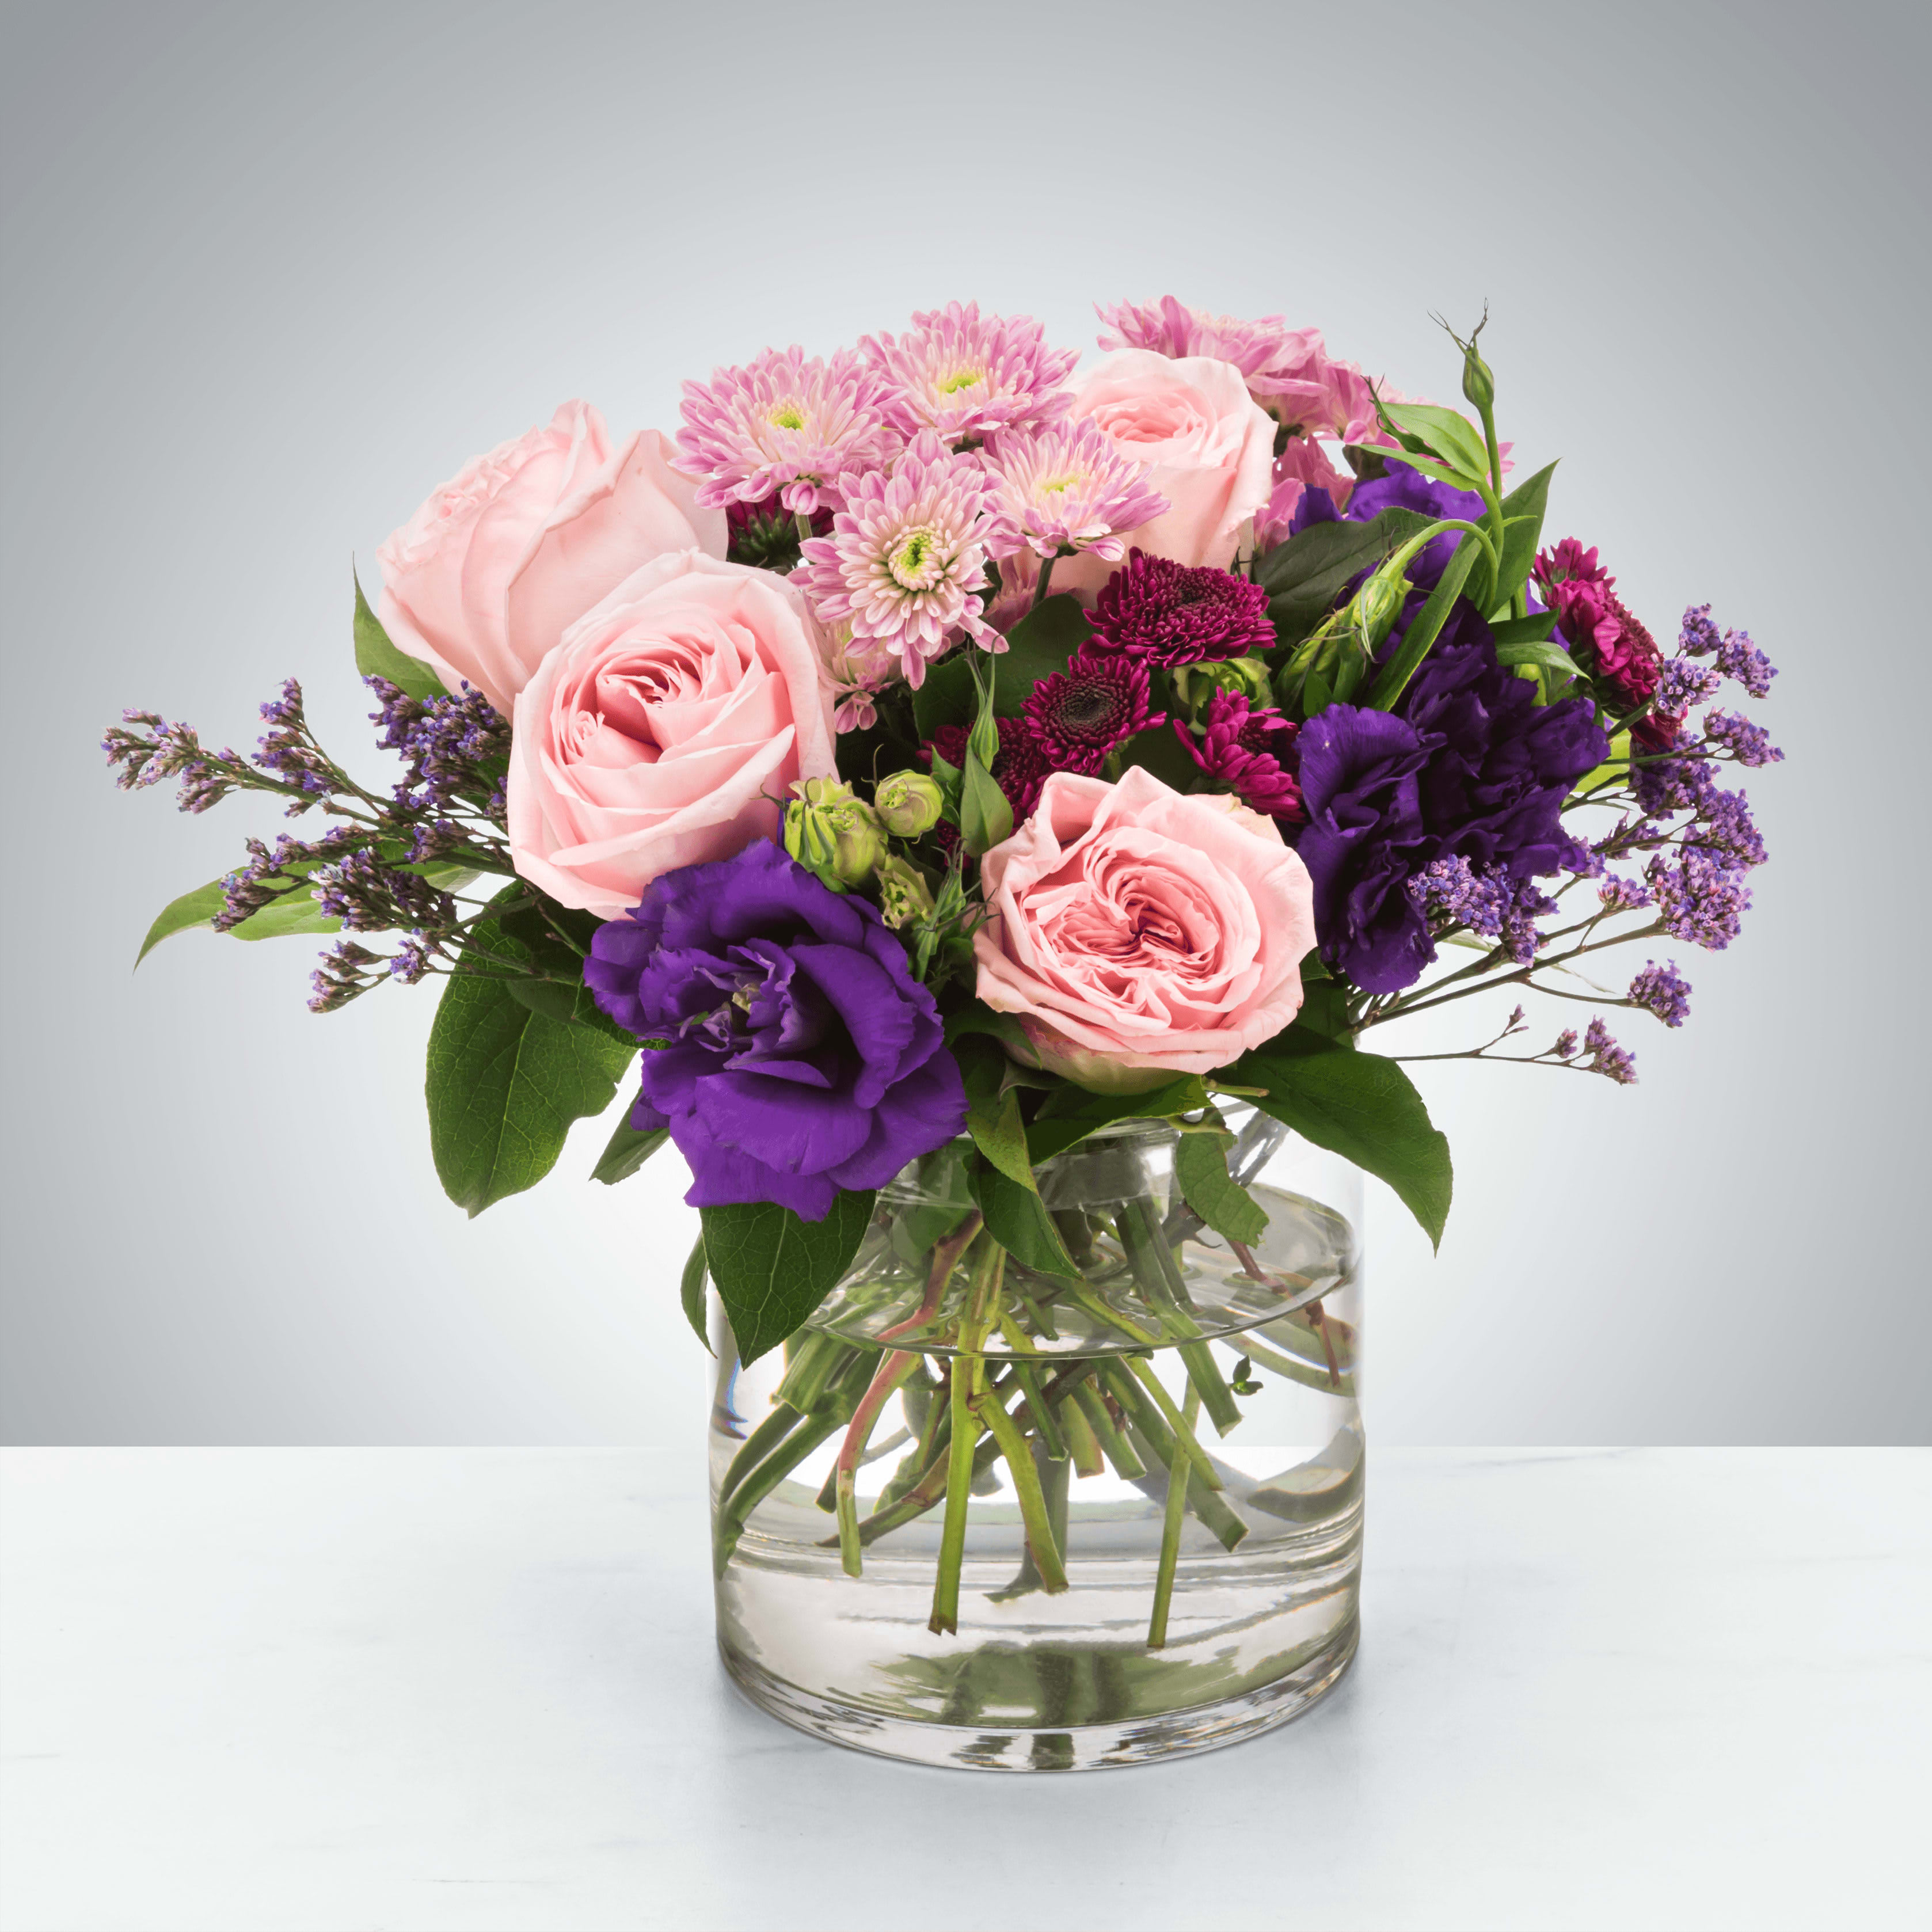 Spring - A selection of pink and purple flowers come together in an eye-pleasing arrangement. This arrangement makes a great gift for Mother's Day, Women's Day, or as a thinking of you present. 